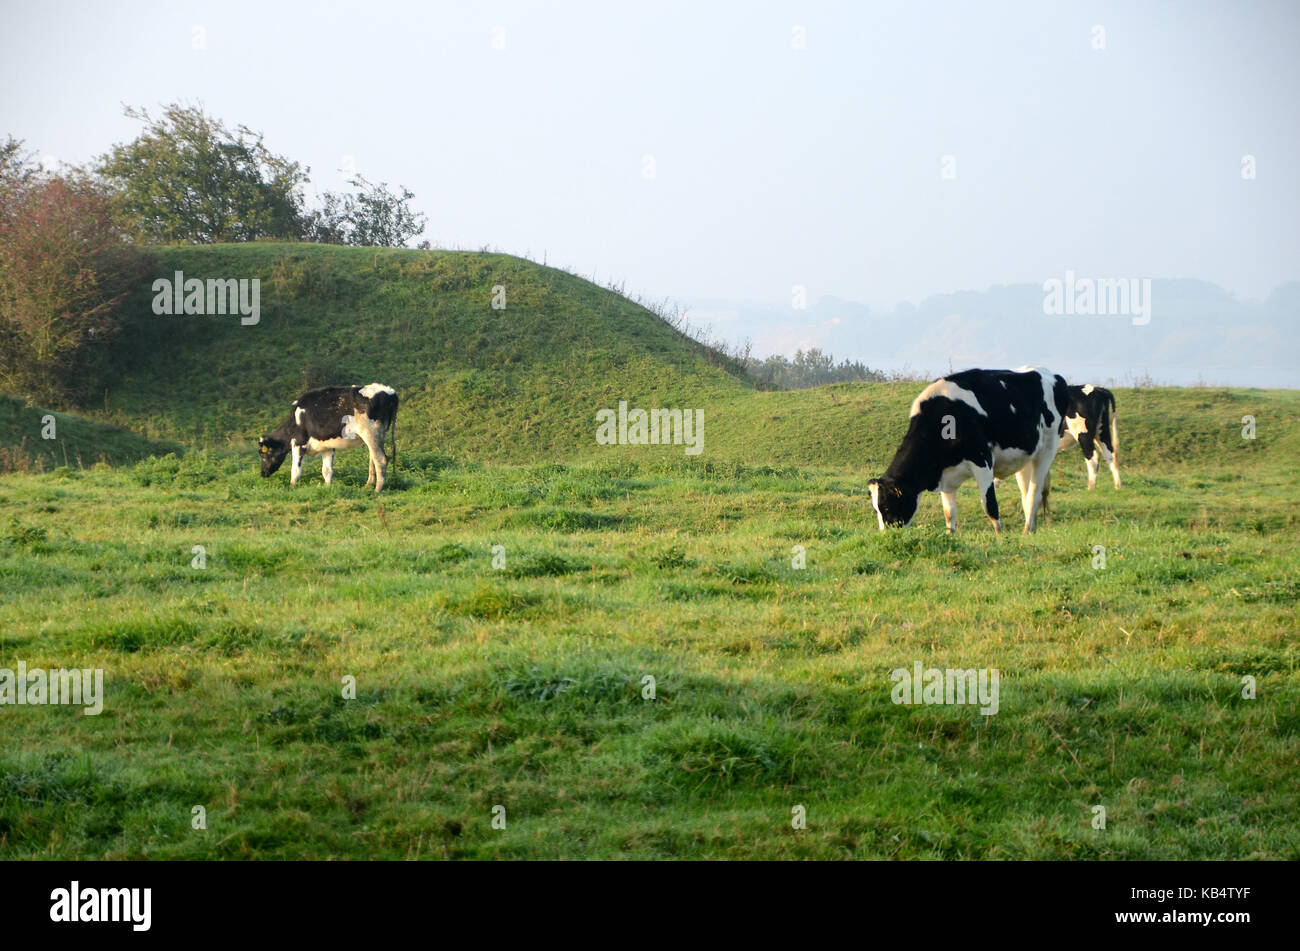 Grazing black and white cattle seen grazing in a sloped landscape. Stock Photo